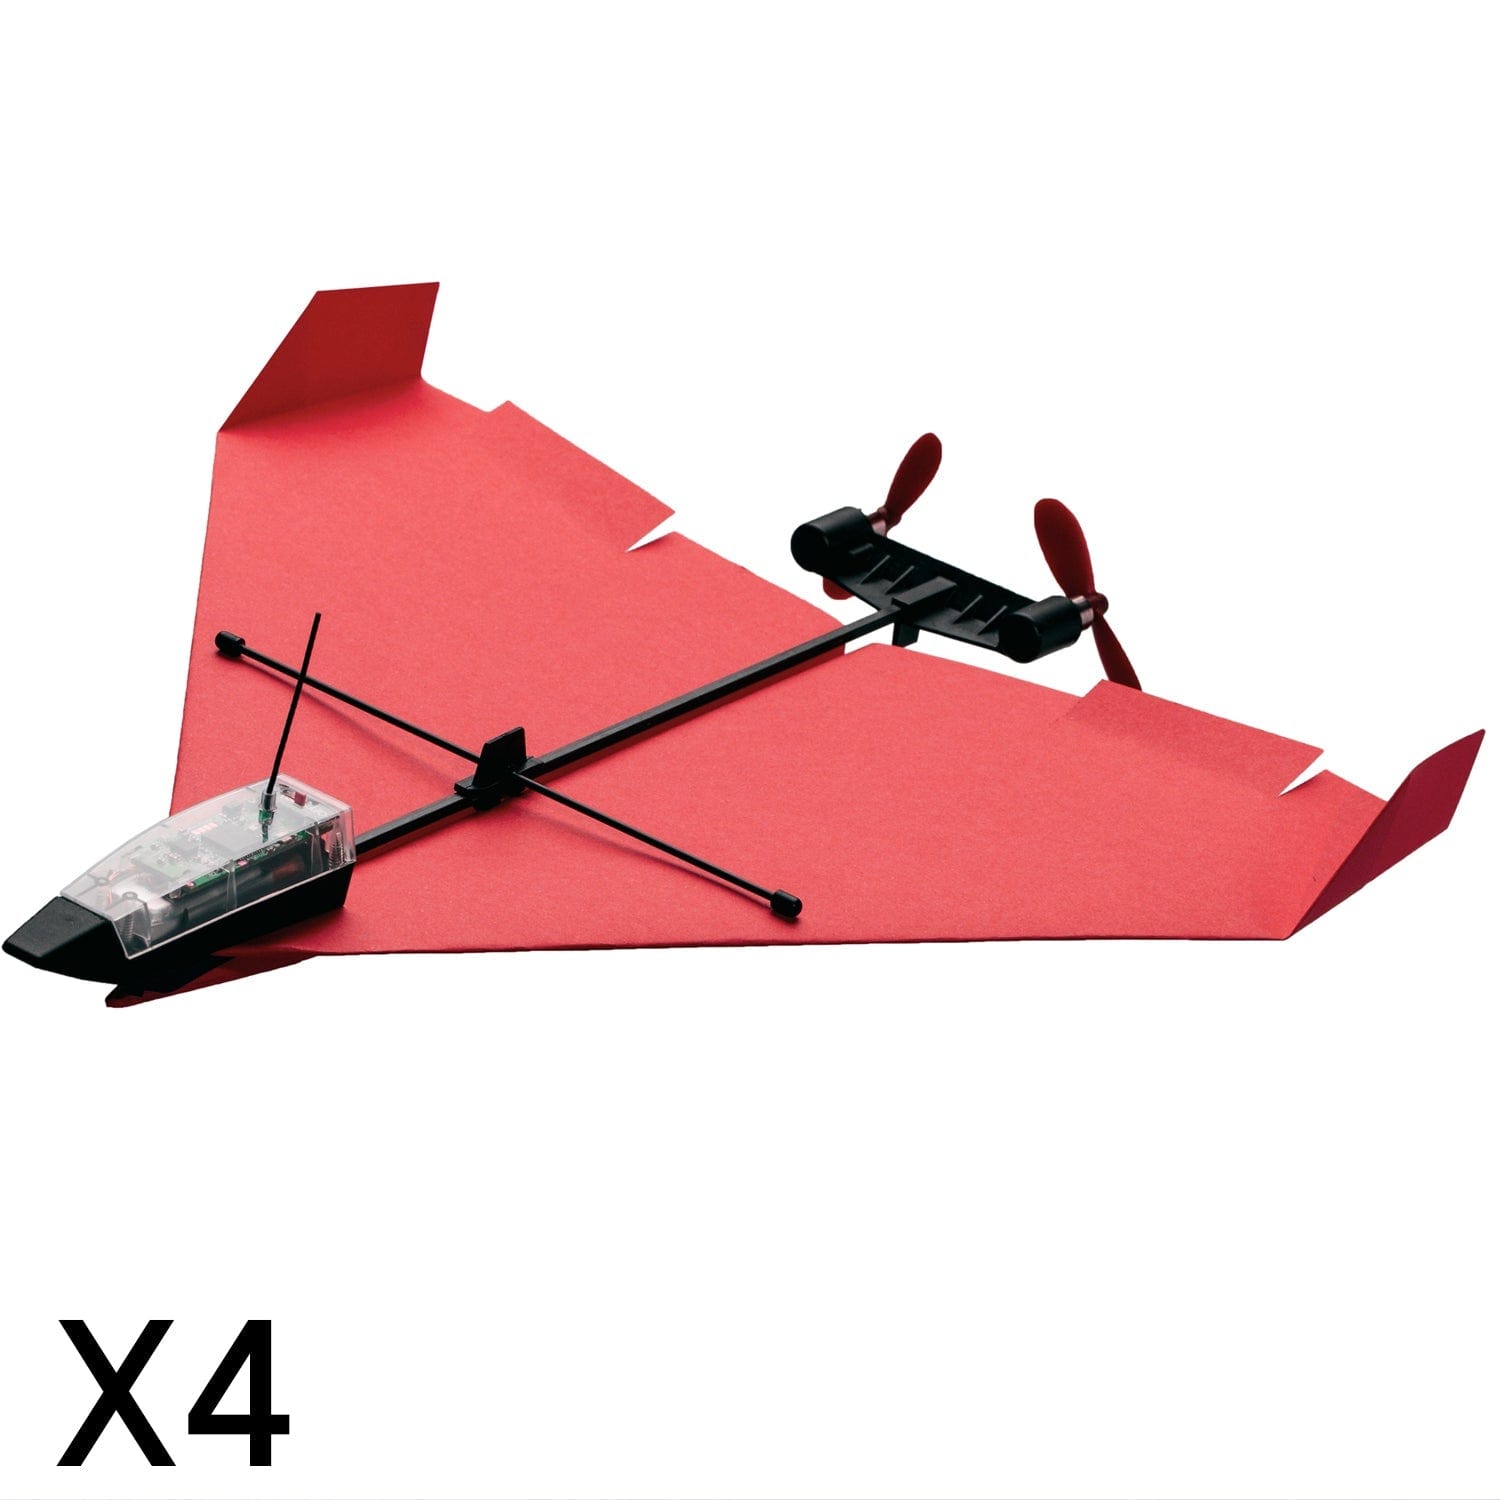 POWERUP 3.0 Paper Airplane Kit Electric Motor DIY Paper Planes for